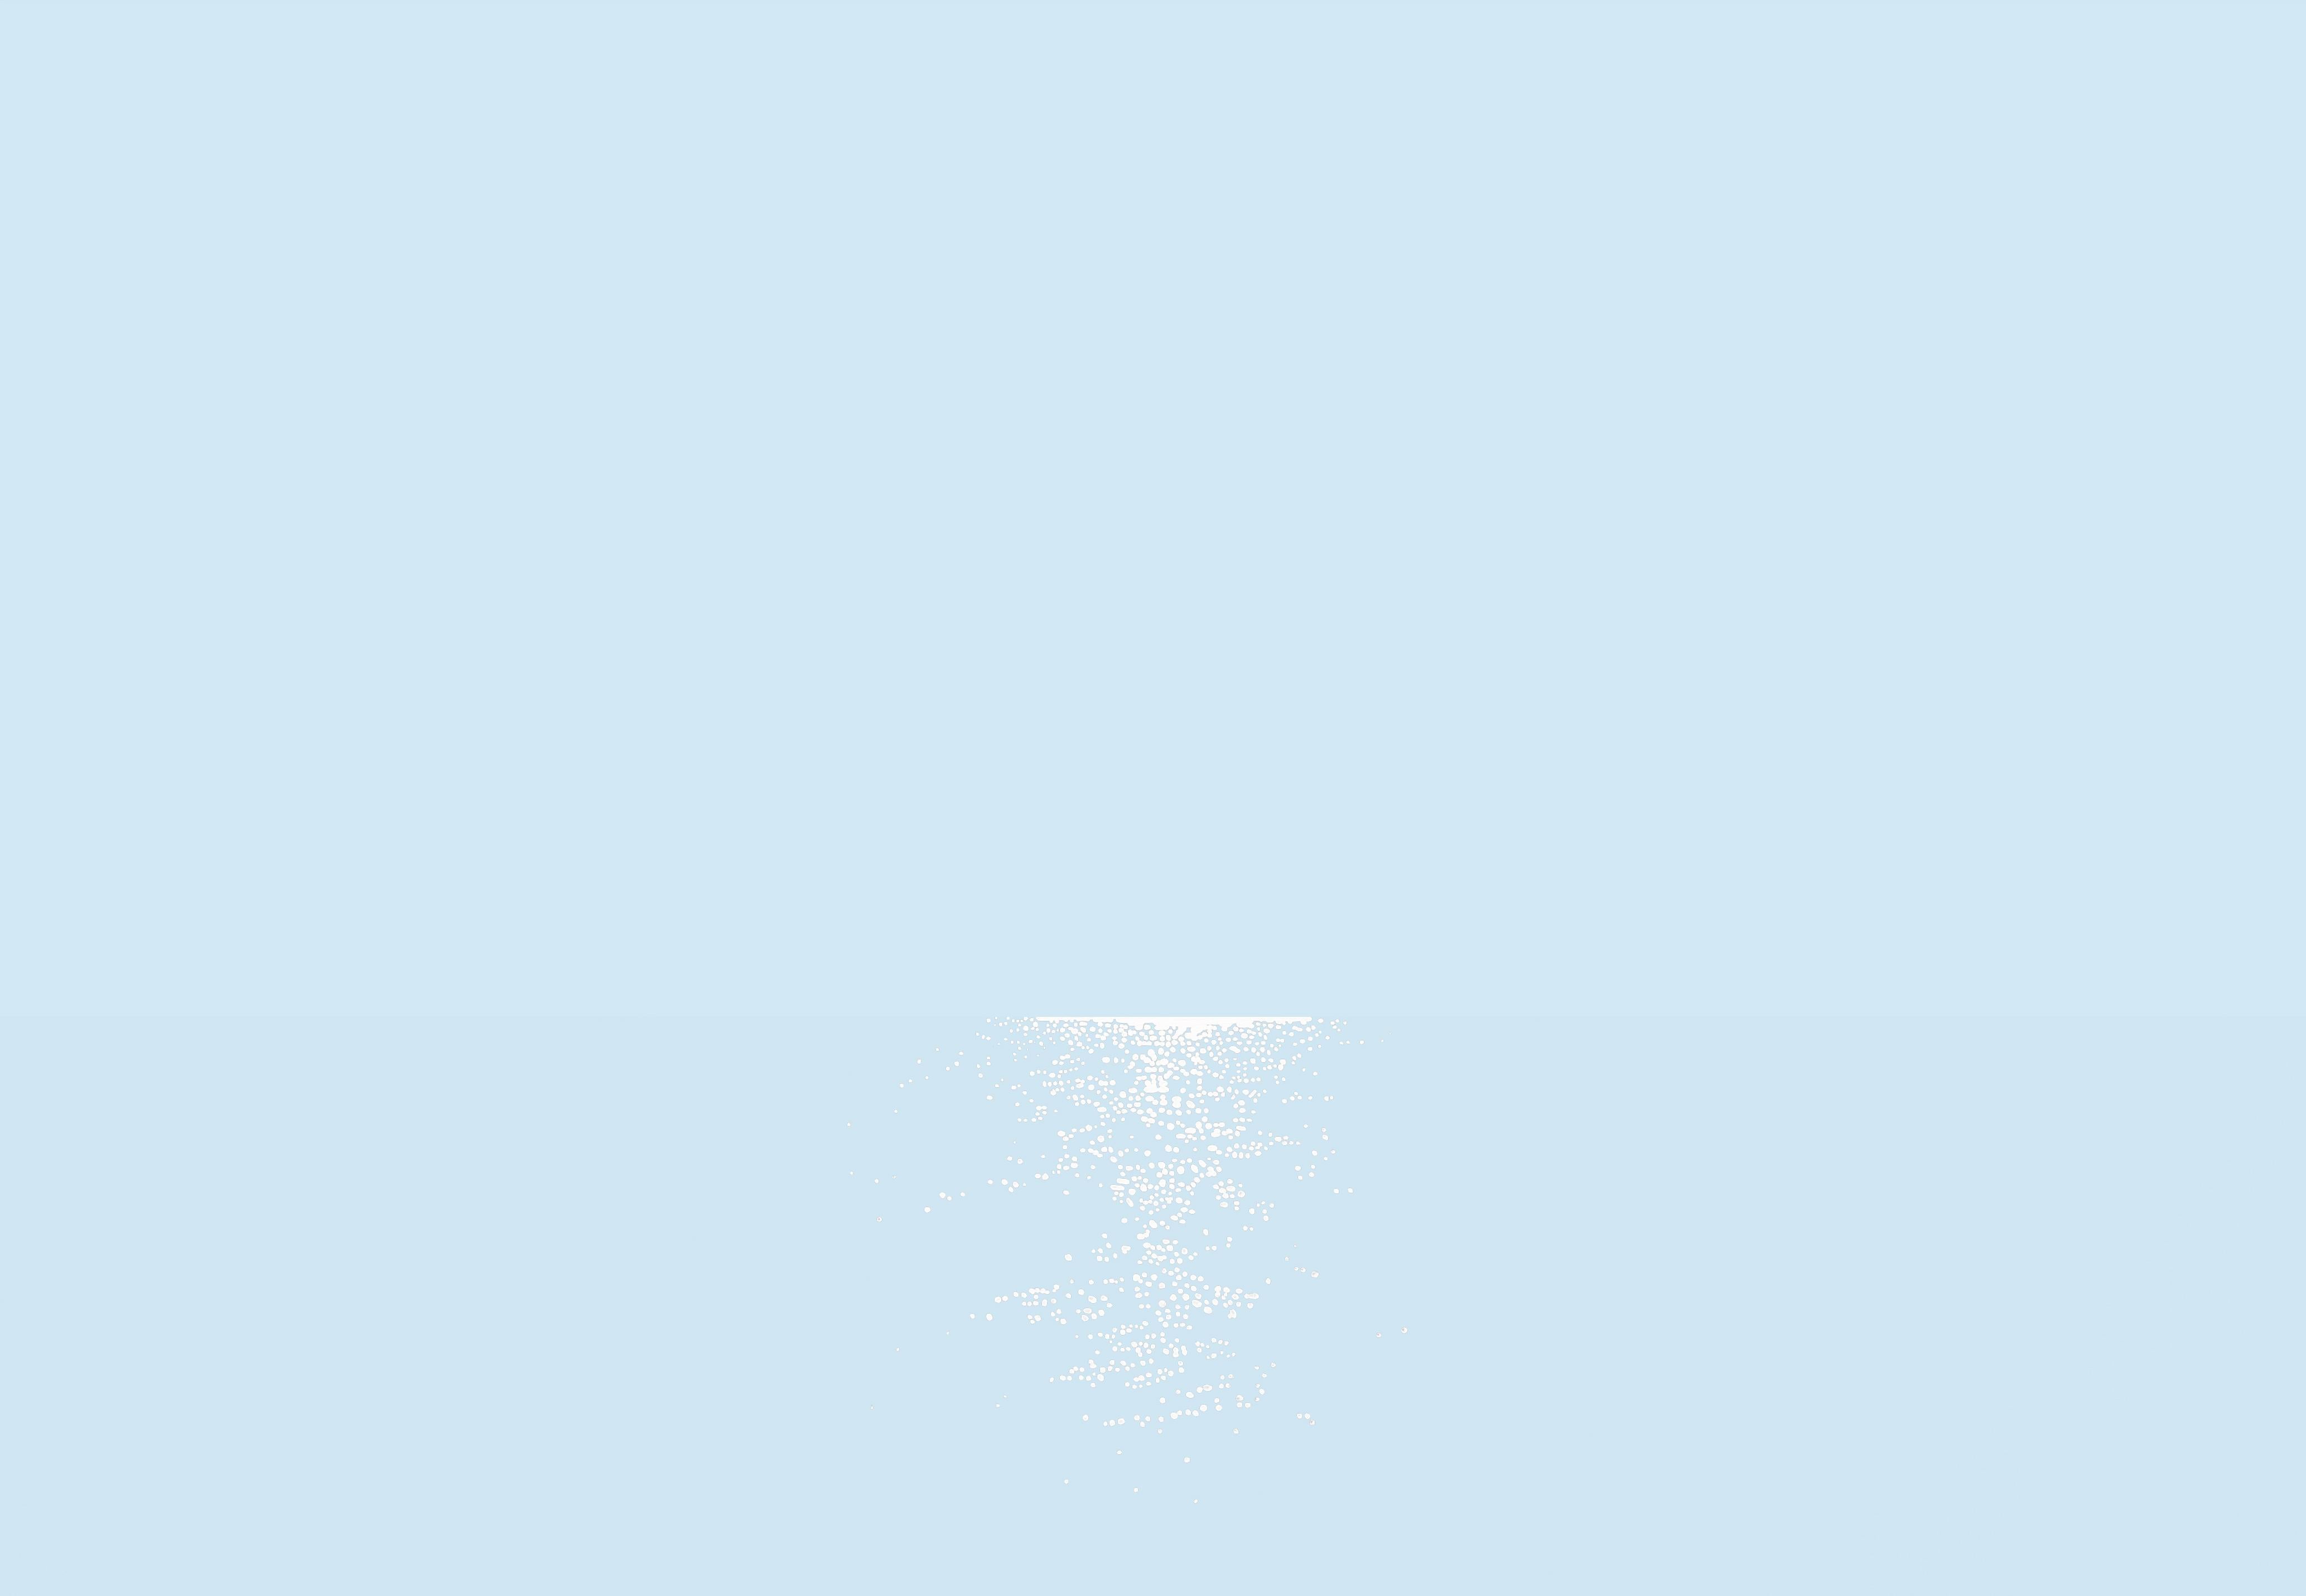 Light 5 July 04:23, Modern Landscape Painting, Minimalistic, Abstract, Sea View